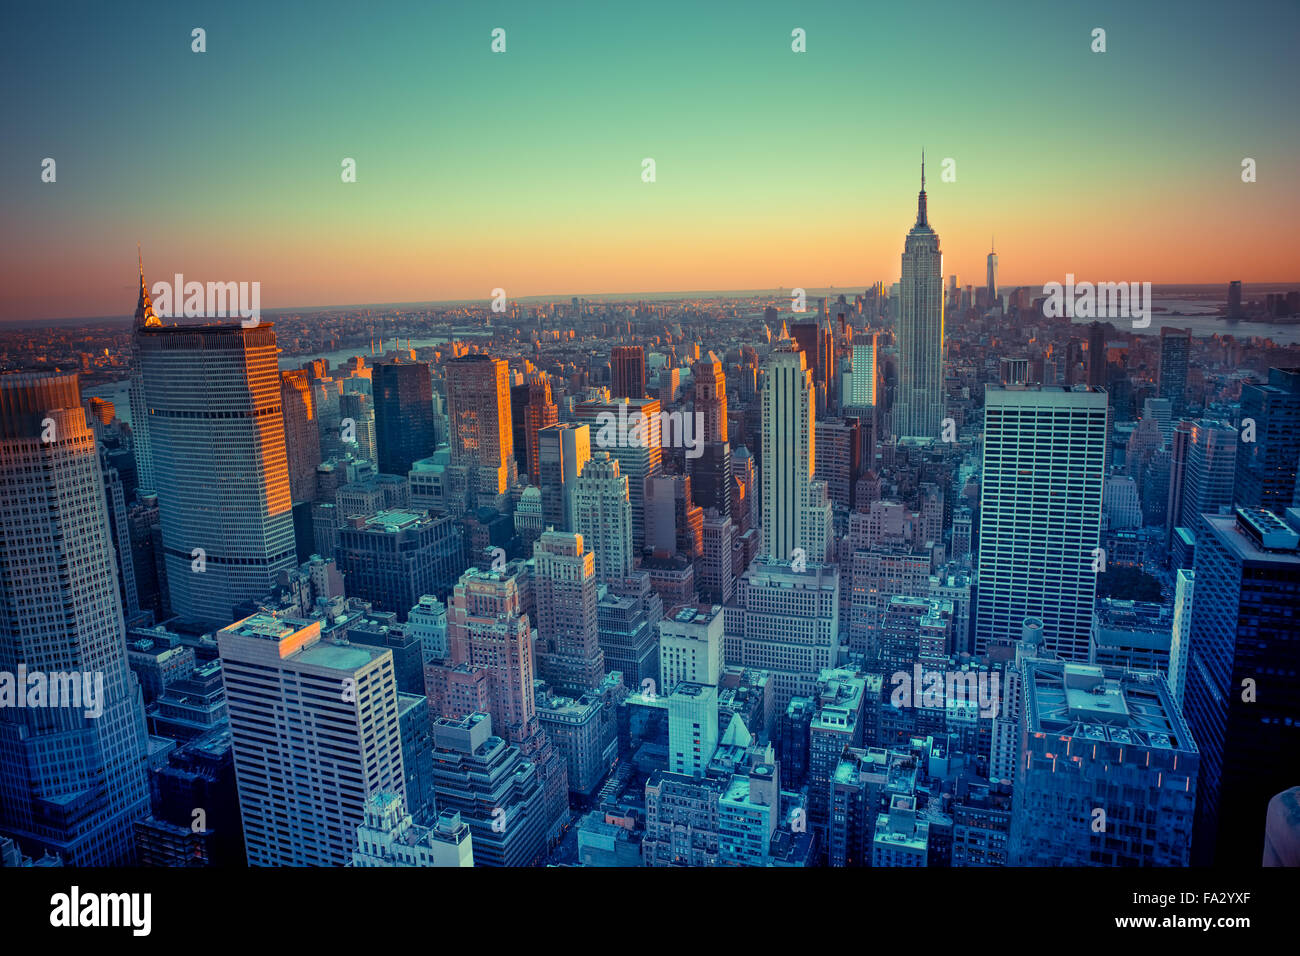 View across buildings in New York City at sunset Stock Photo